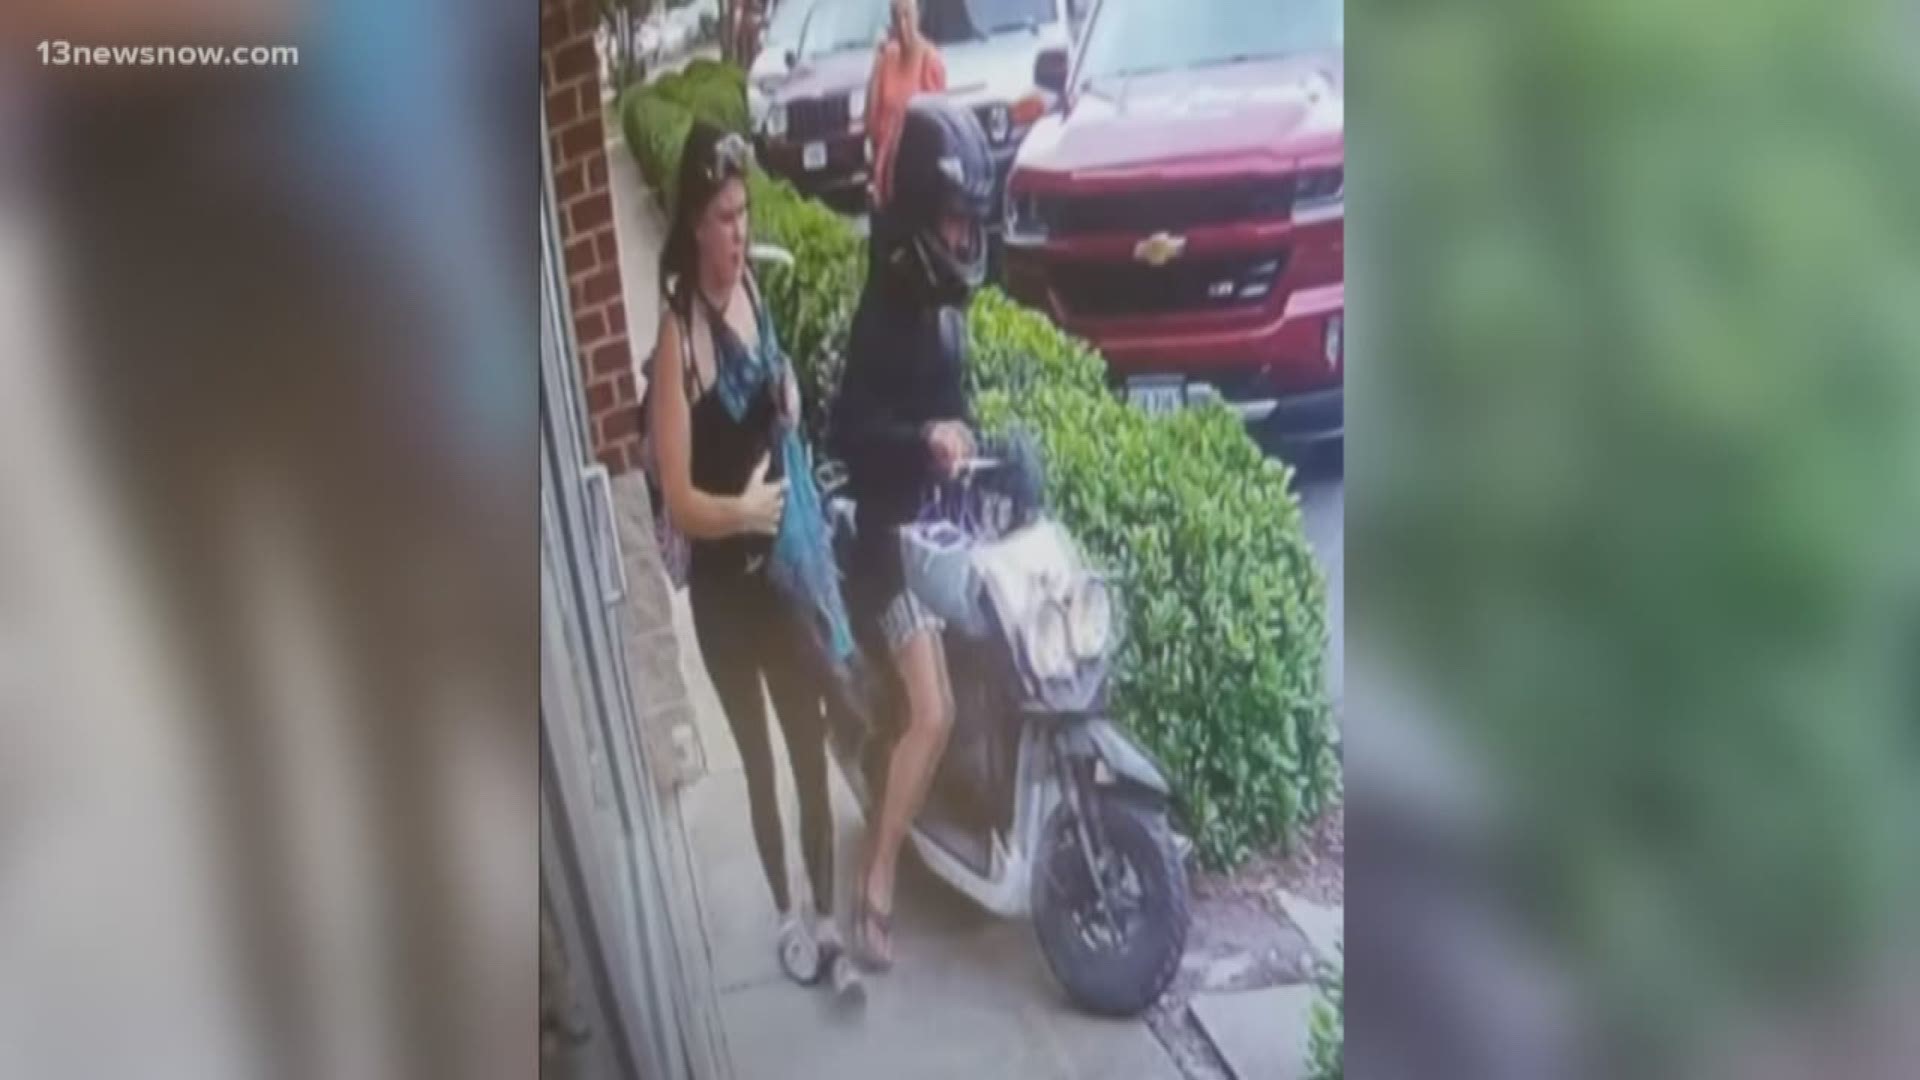 A woman went into Thrift Store USA and stole as much as she could grab. She went inside and fist-pumped before getting on the back of a man's moped and taking off.